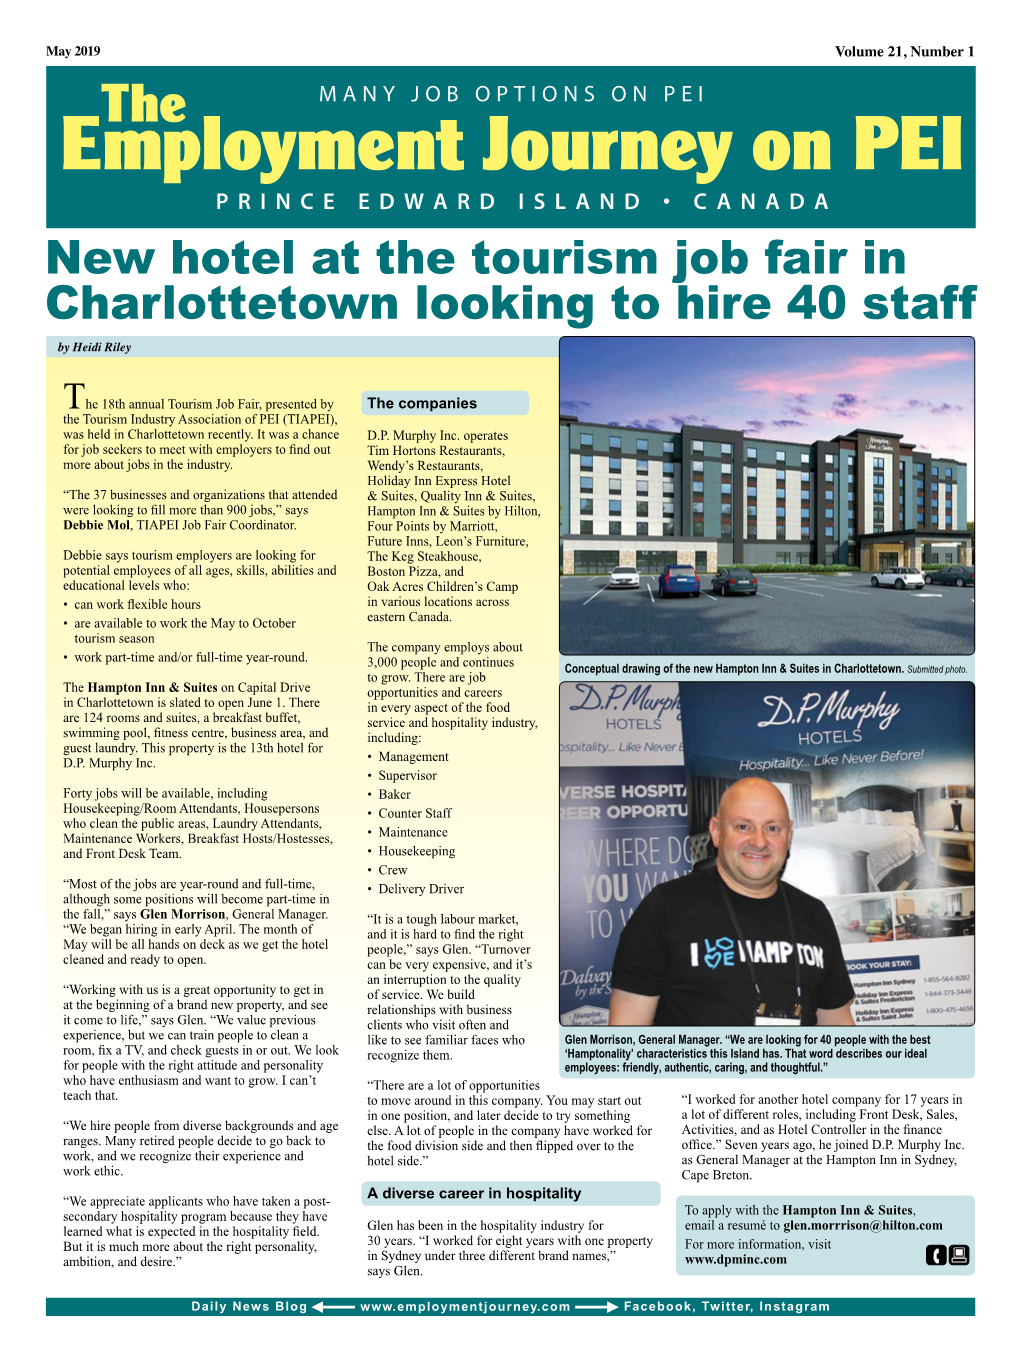 New Hotel at the Tourism Job Fair in Charlottetown Looking to Hire 40 Staff